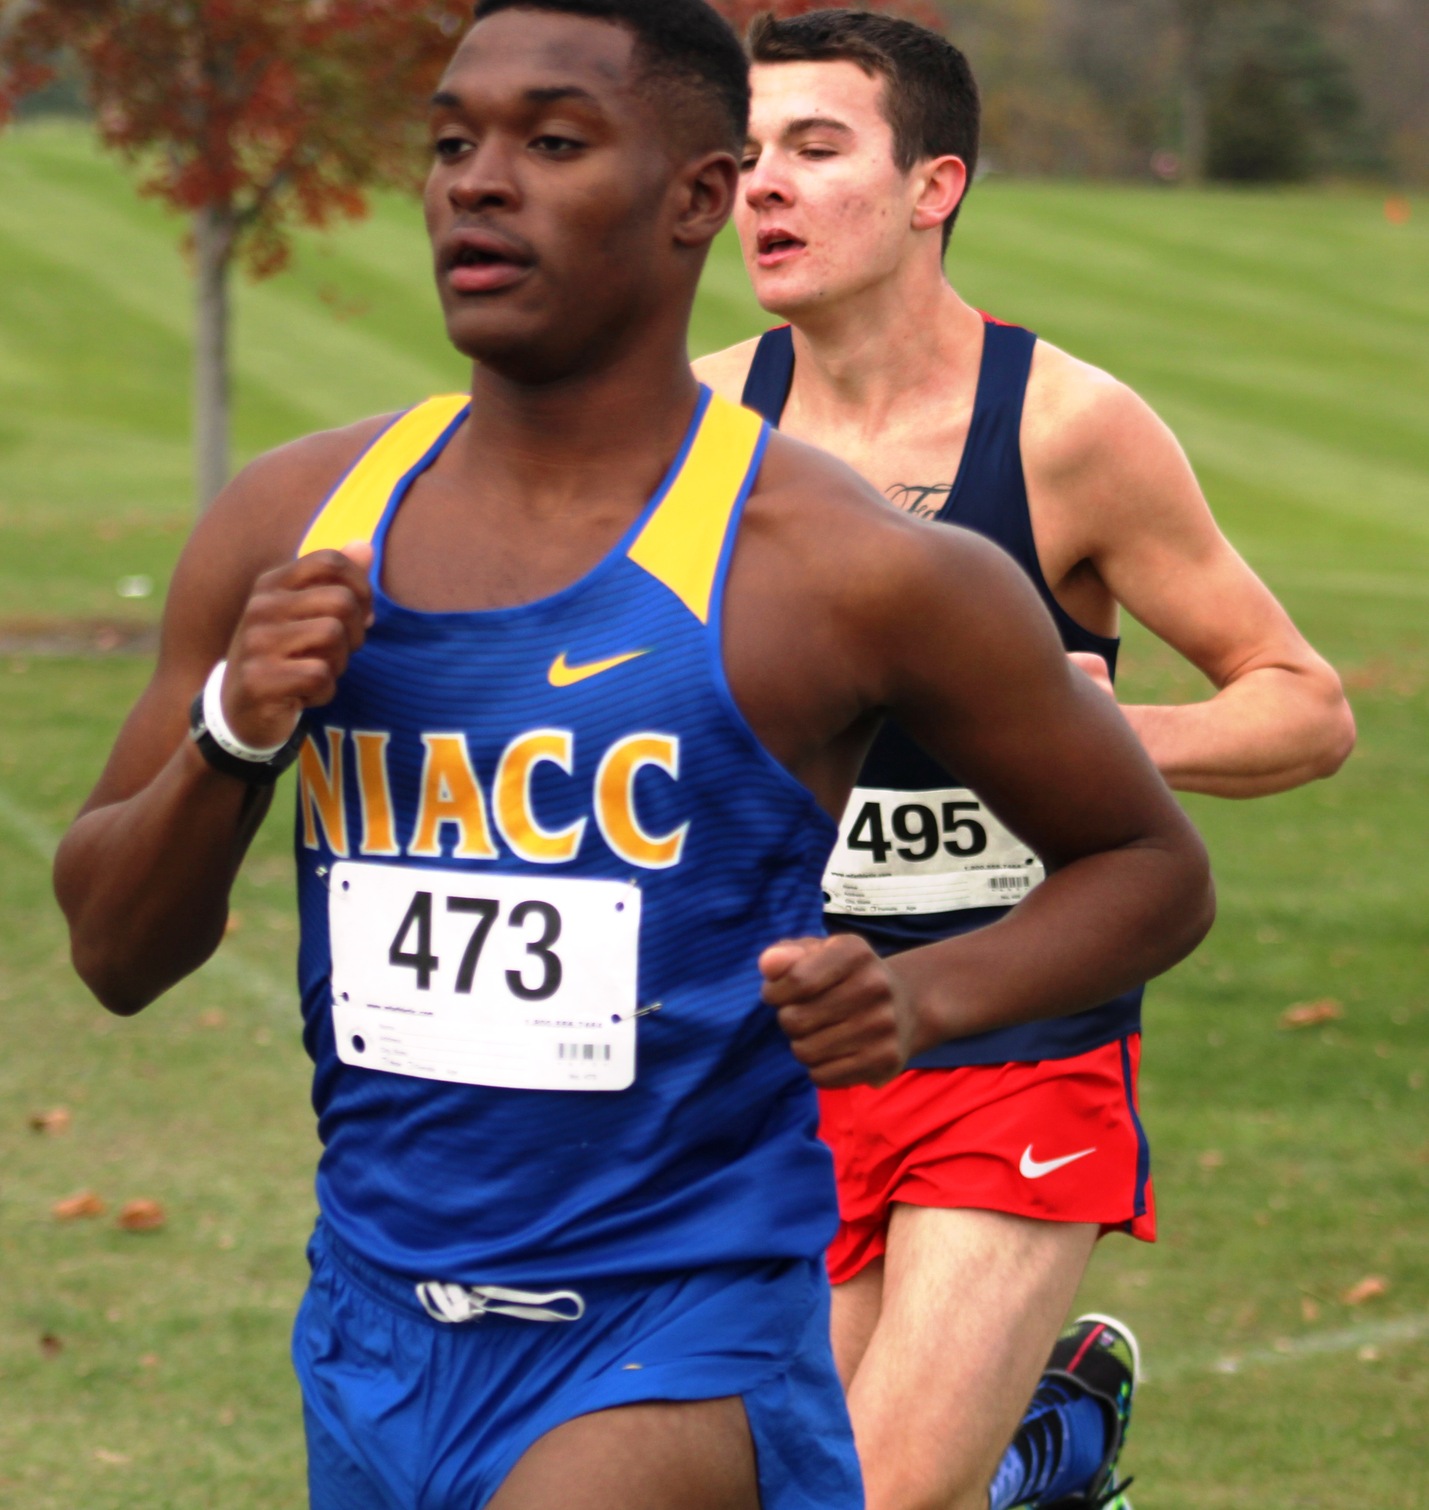 Sophomore David Carter runs at the regional meet in Fort Dodge on Oct. 29.